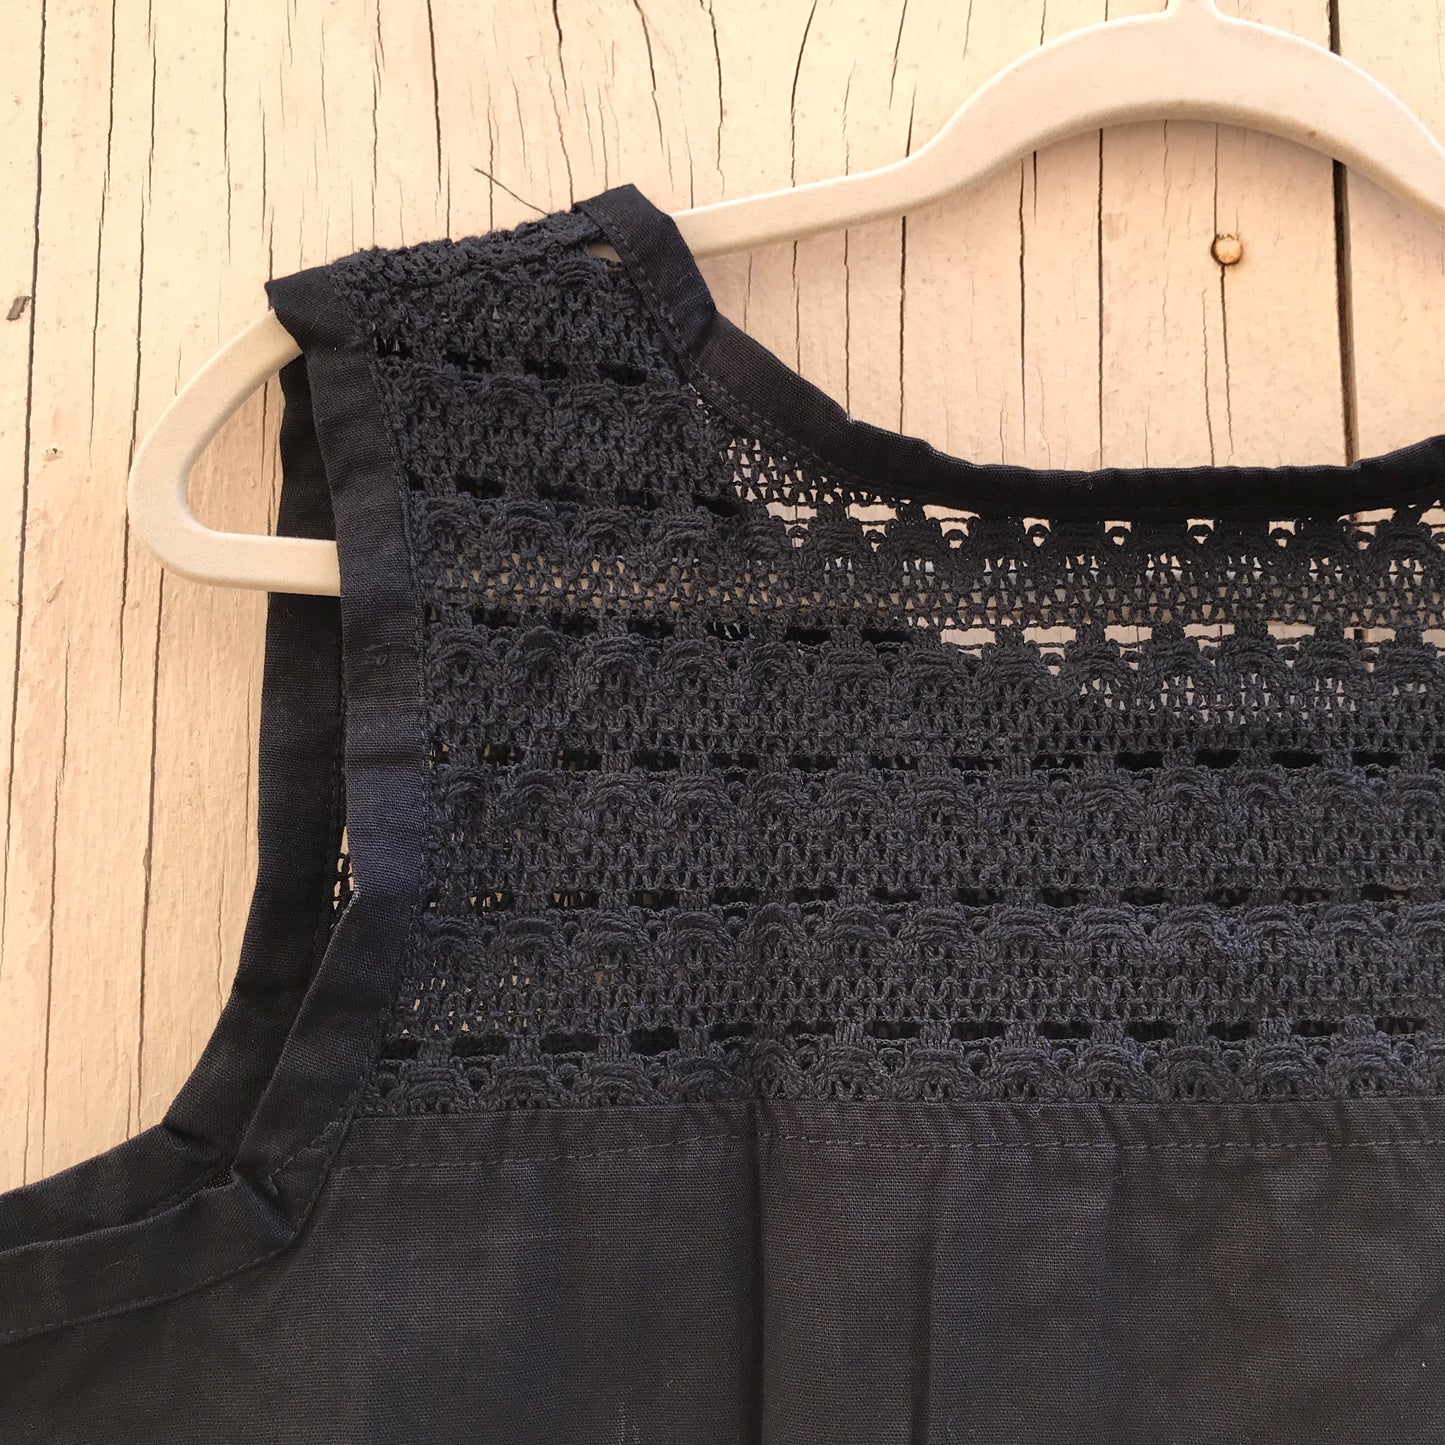 Embroidered and Crochet Tank Top